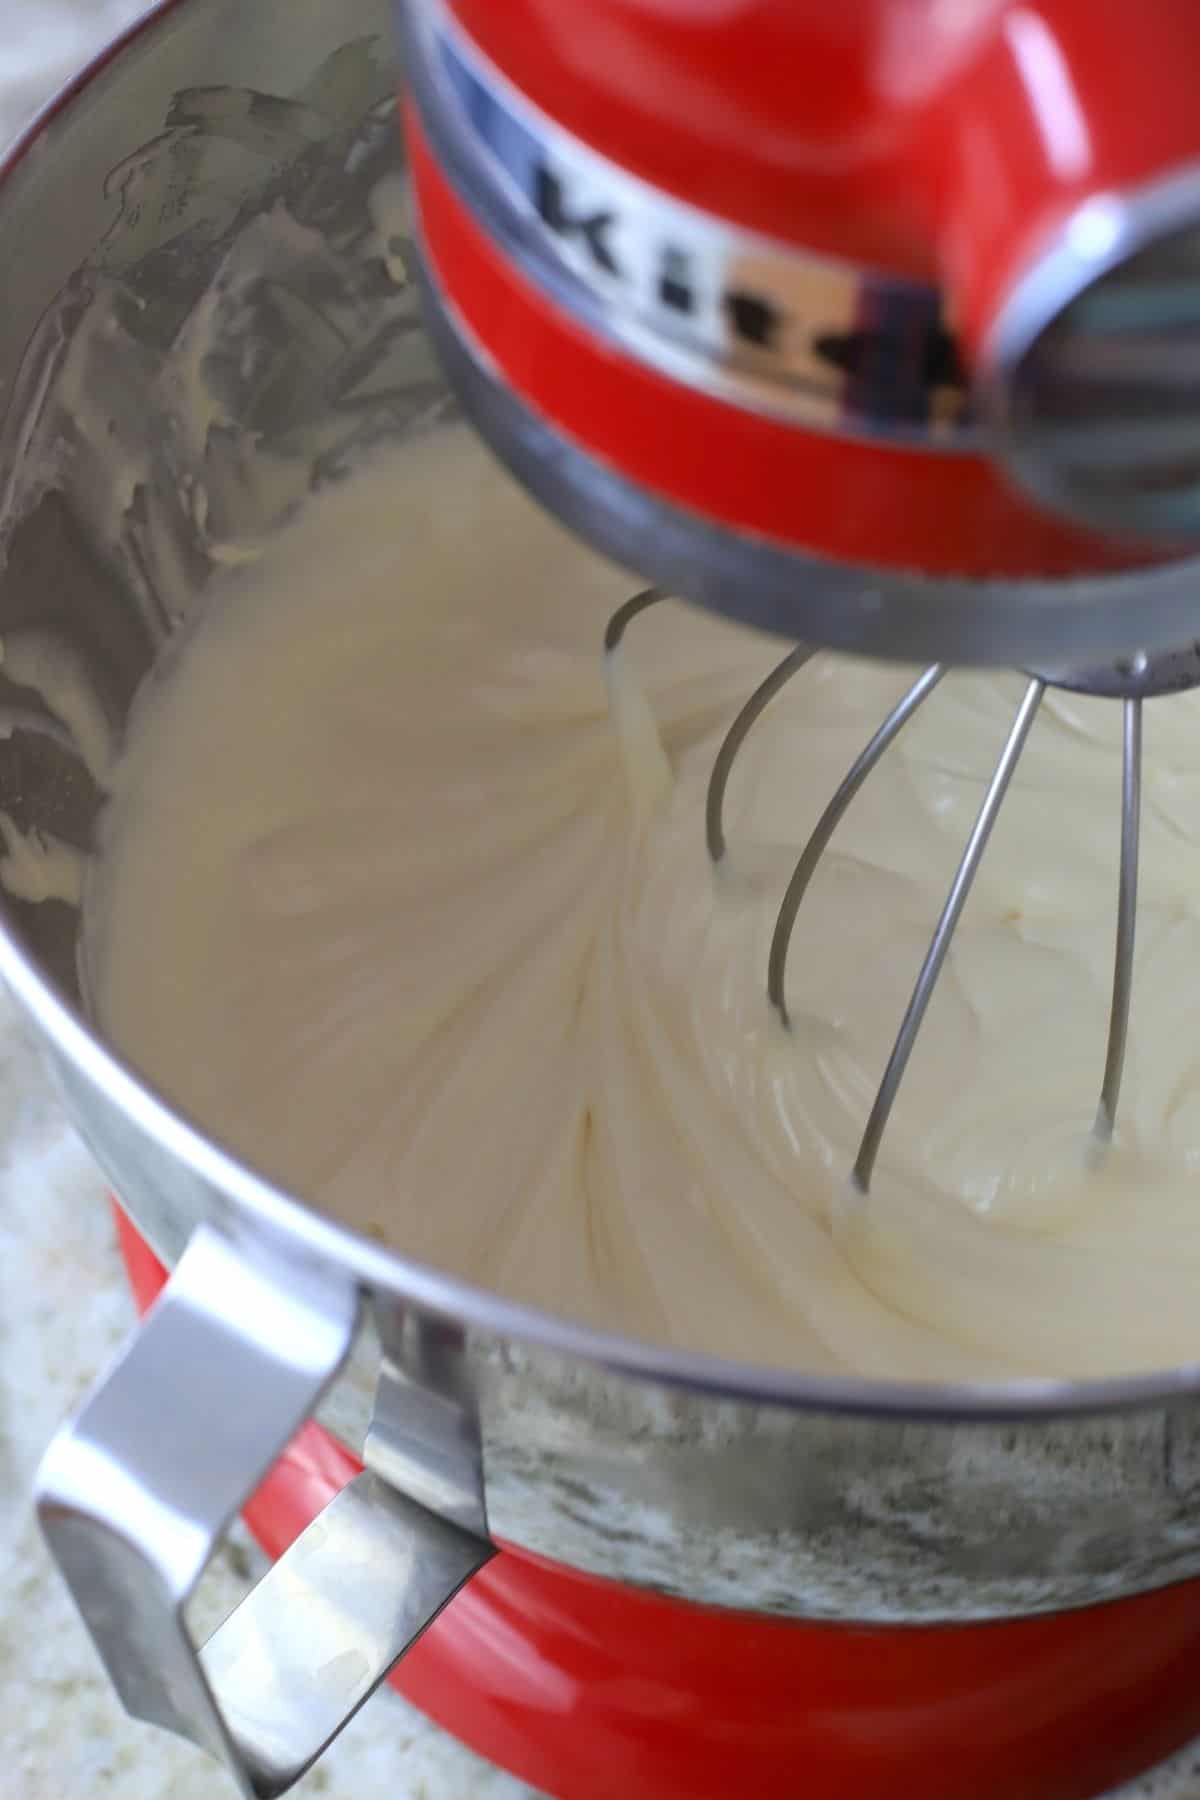 mixing the batter in the stand mixer.